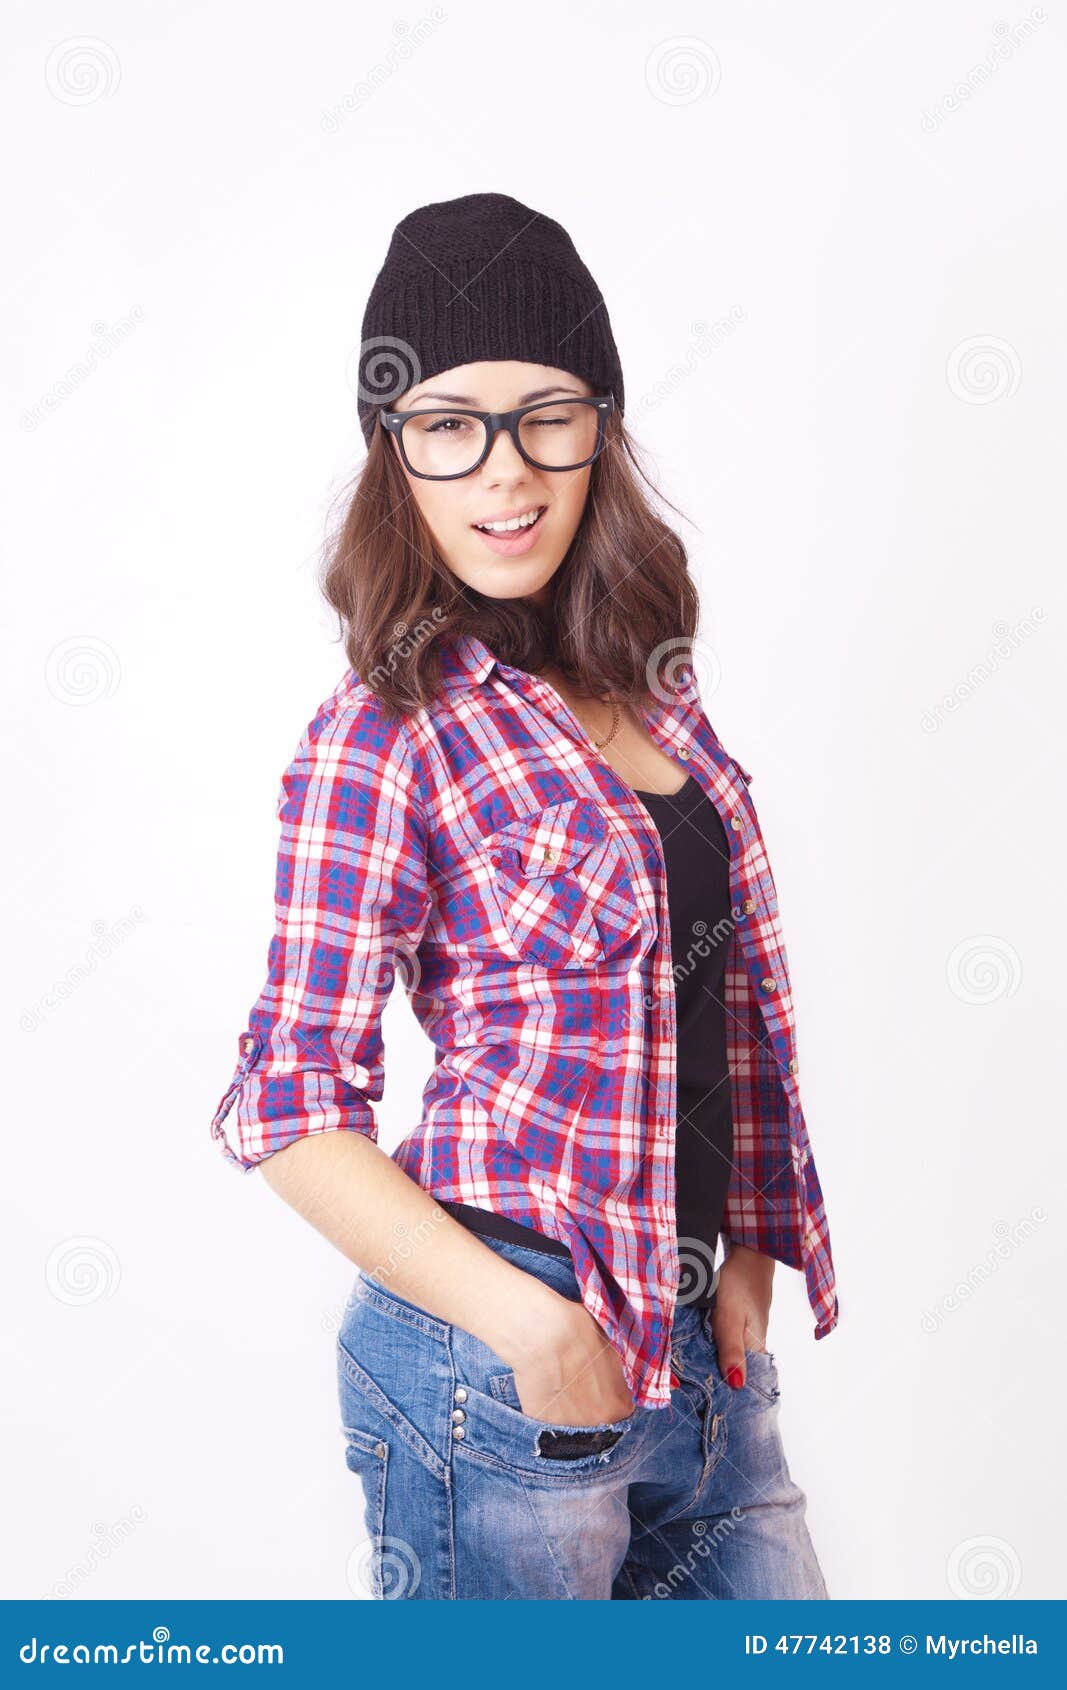 Attractive Young Woman In Glasses And Knitted Cap. Red Lipstick